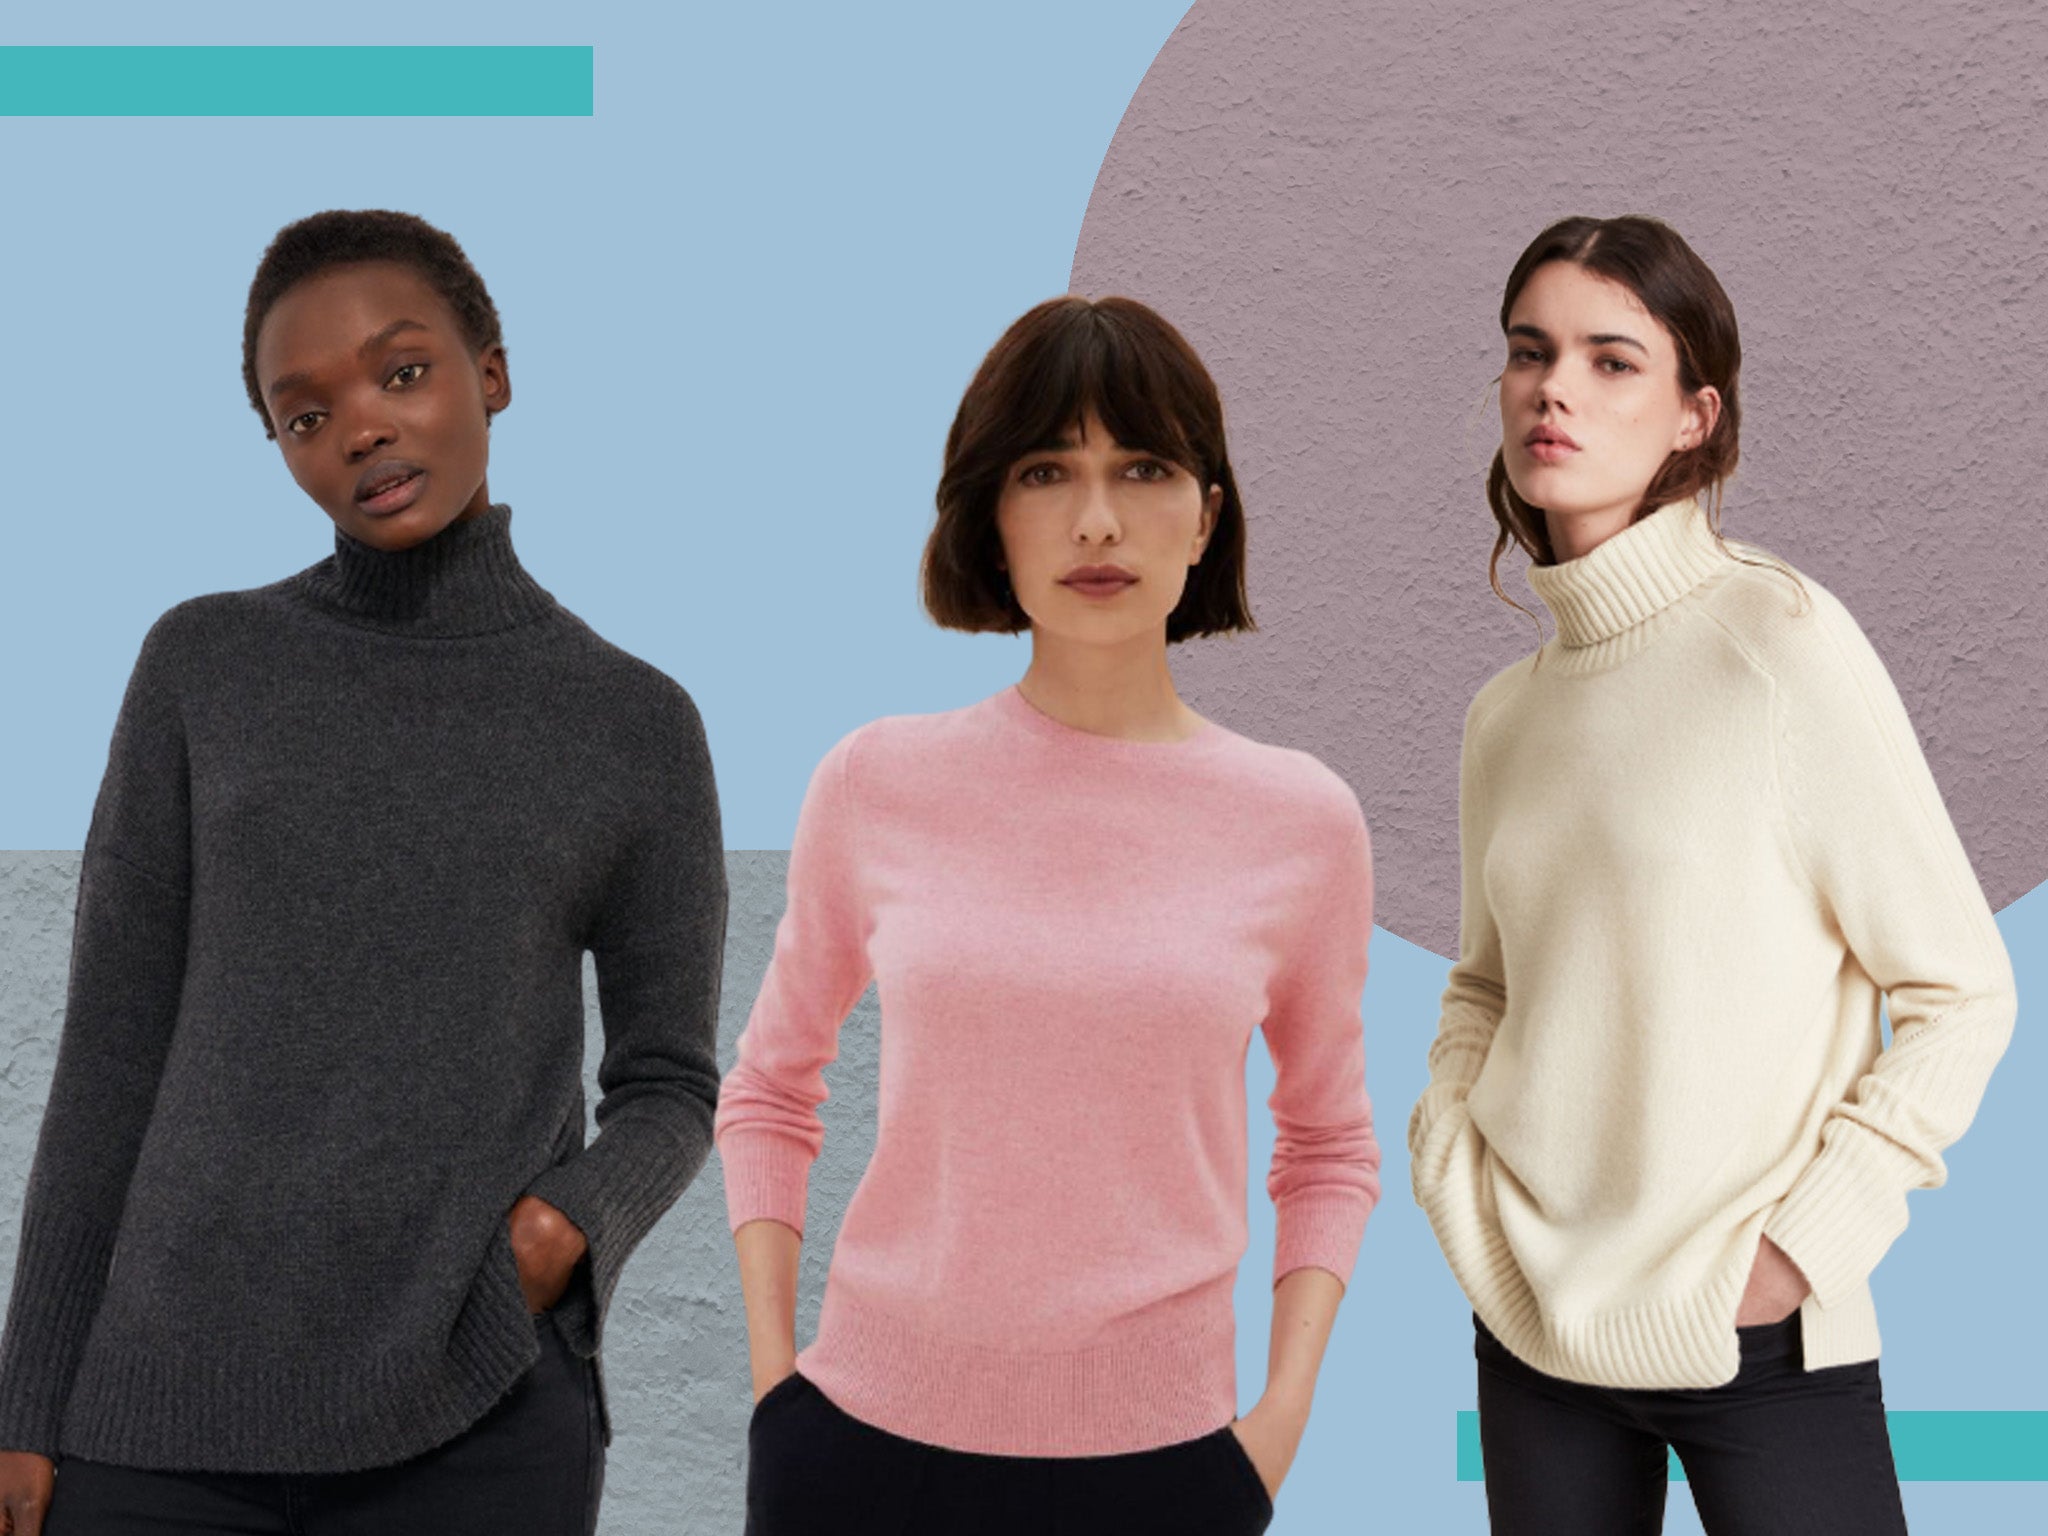 PINK 100% Cashmere Athletic Jerseys for Women